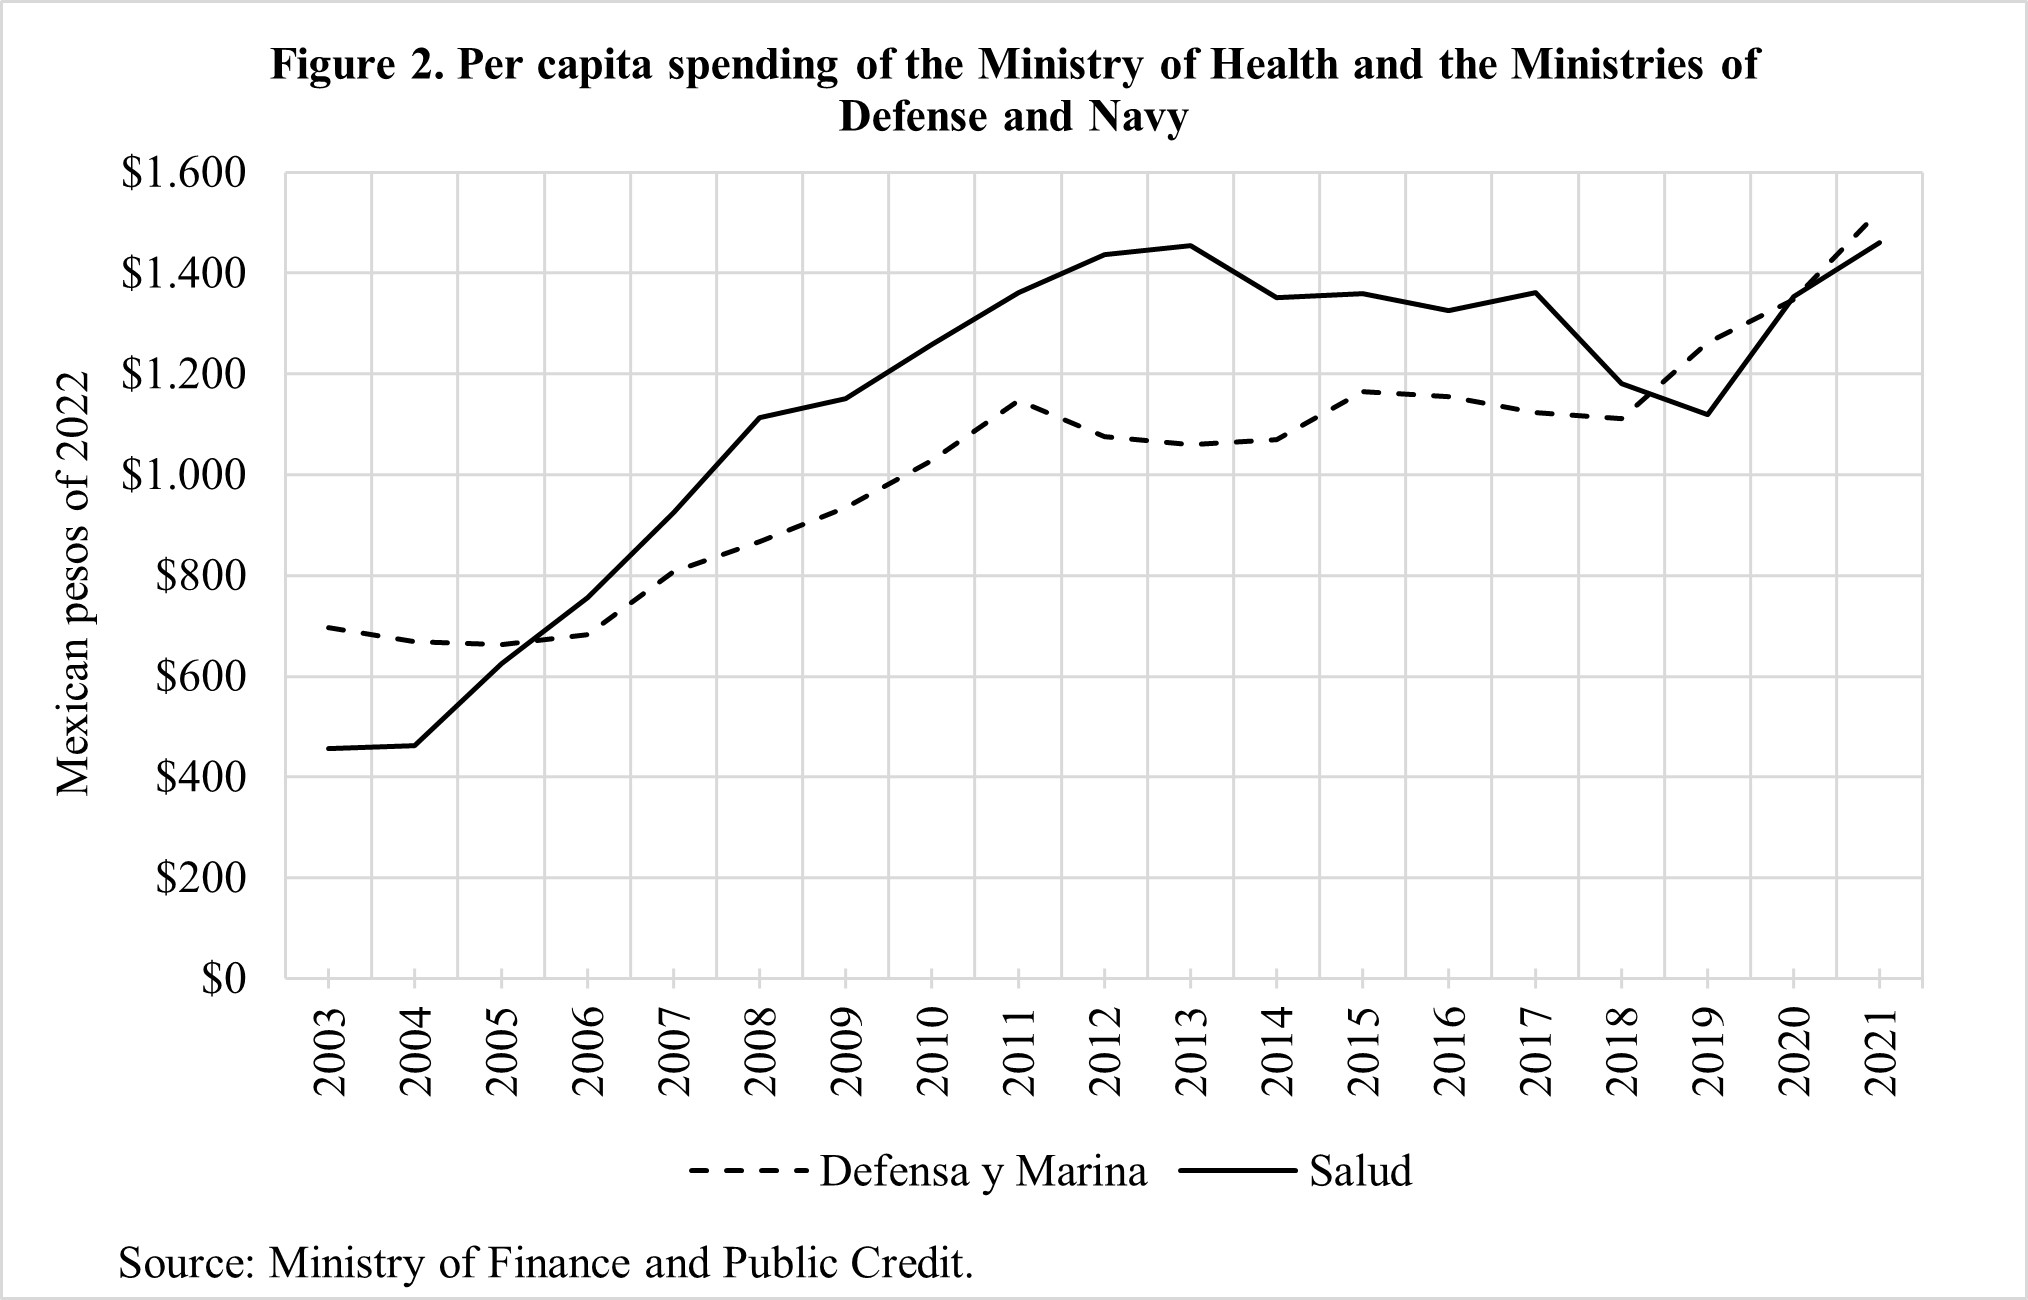 Comparison of expenses of the Military Ministry compared to the Health Ministry 2003 - 2021 